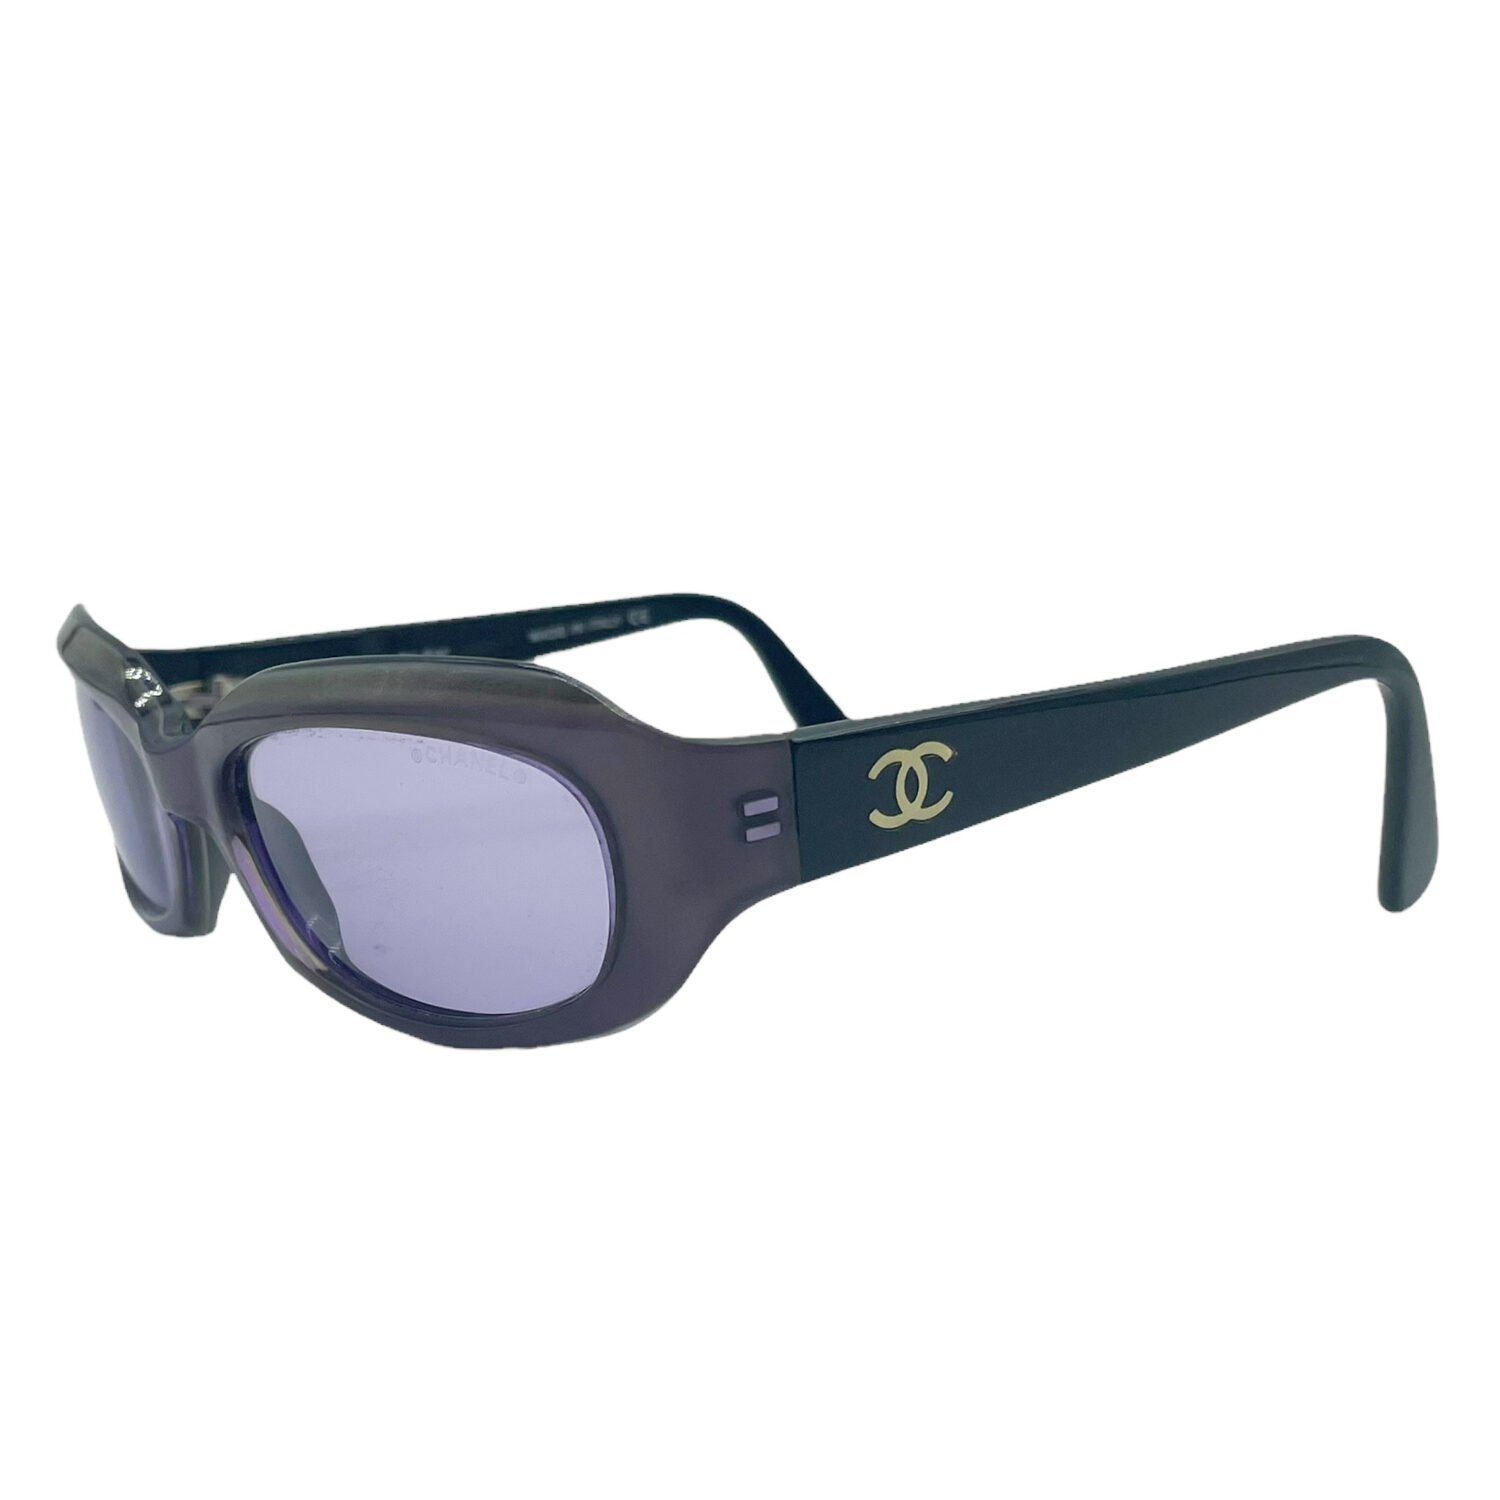 Vintage Chanel Chunky Sunglasses in Purple and Gold | NITRYL